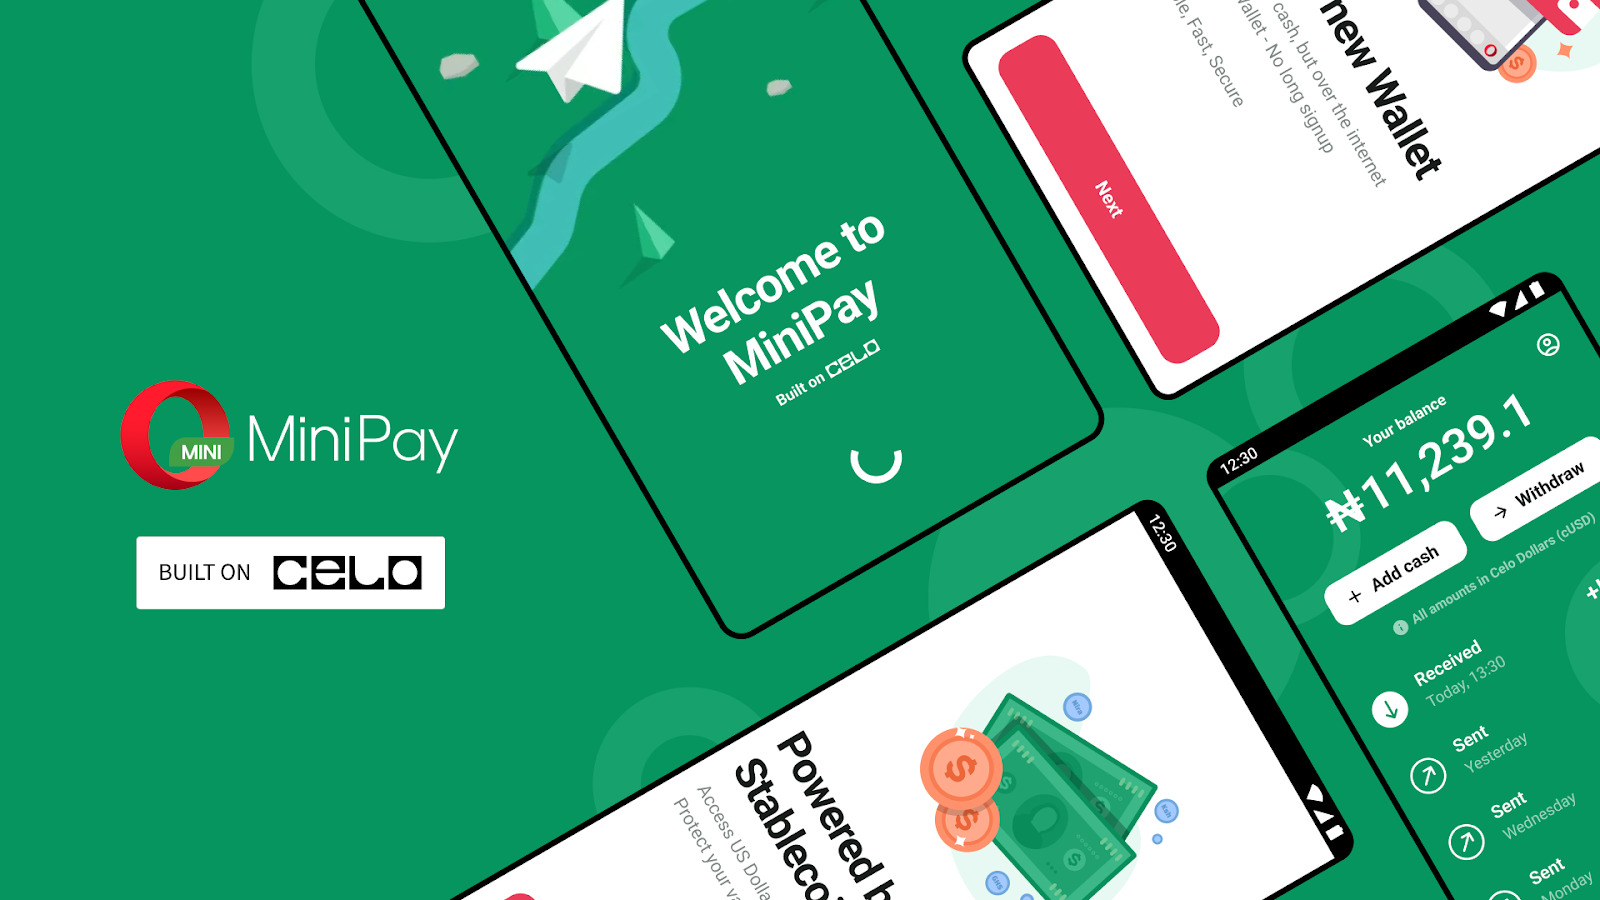 Mobile phone screens show MiniPay, Opera's new Web3-oriented wallet.